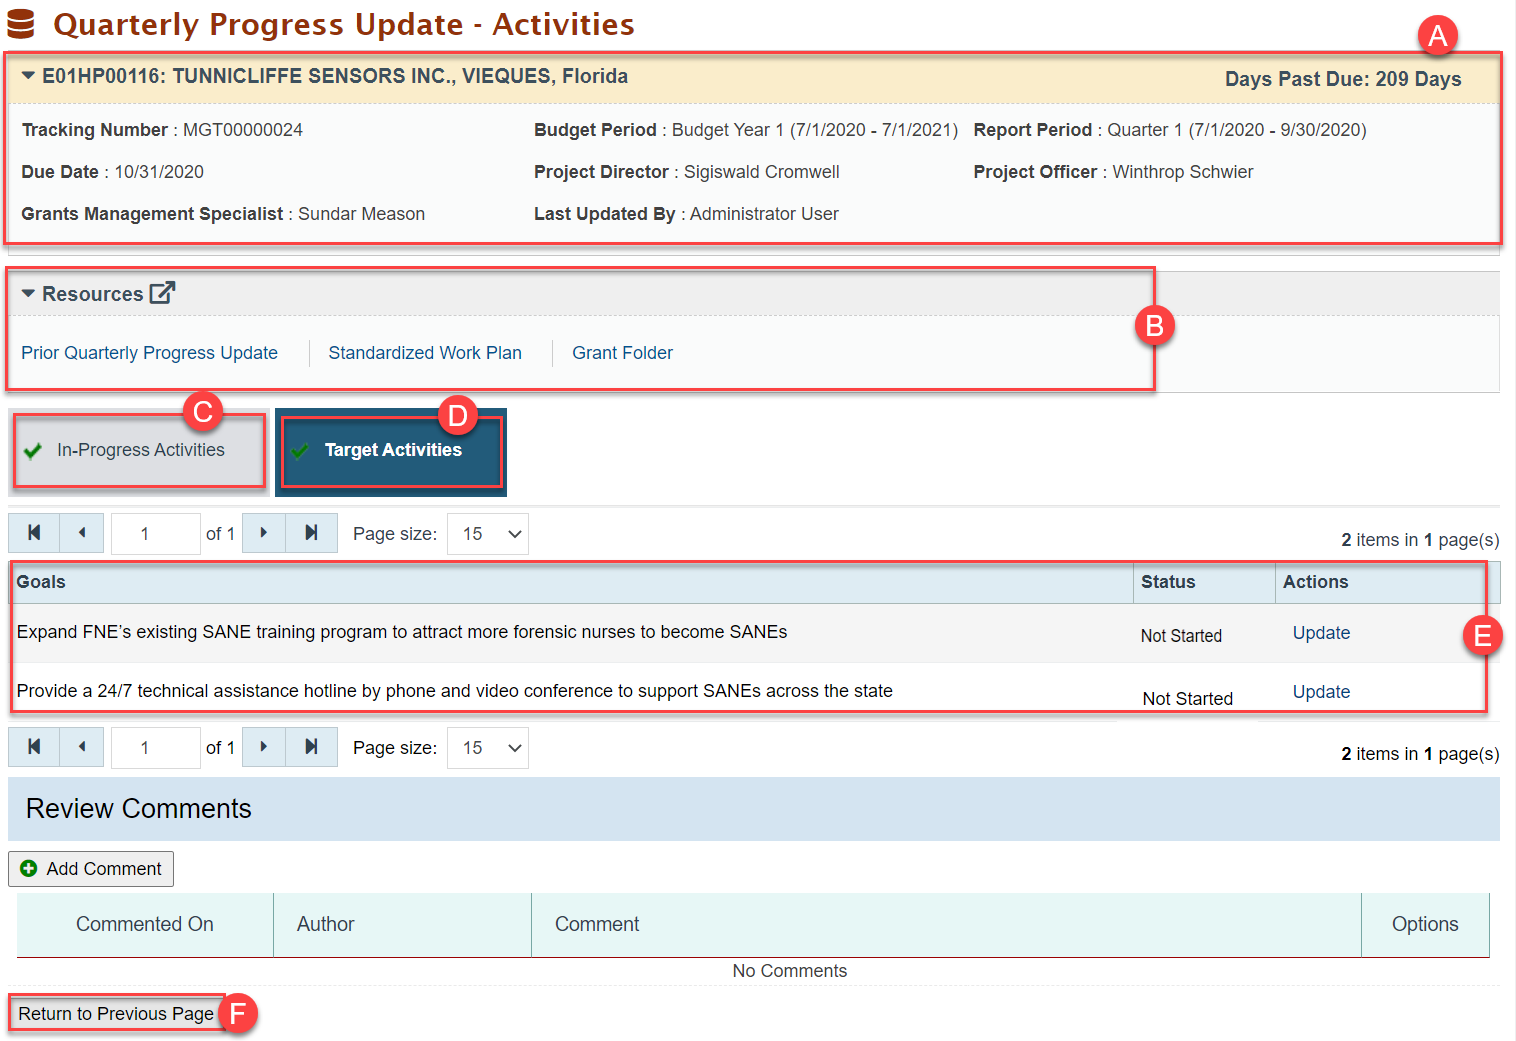 Screenshot of the Quarterly Progress Update Activities page showing page features